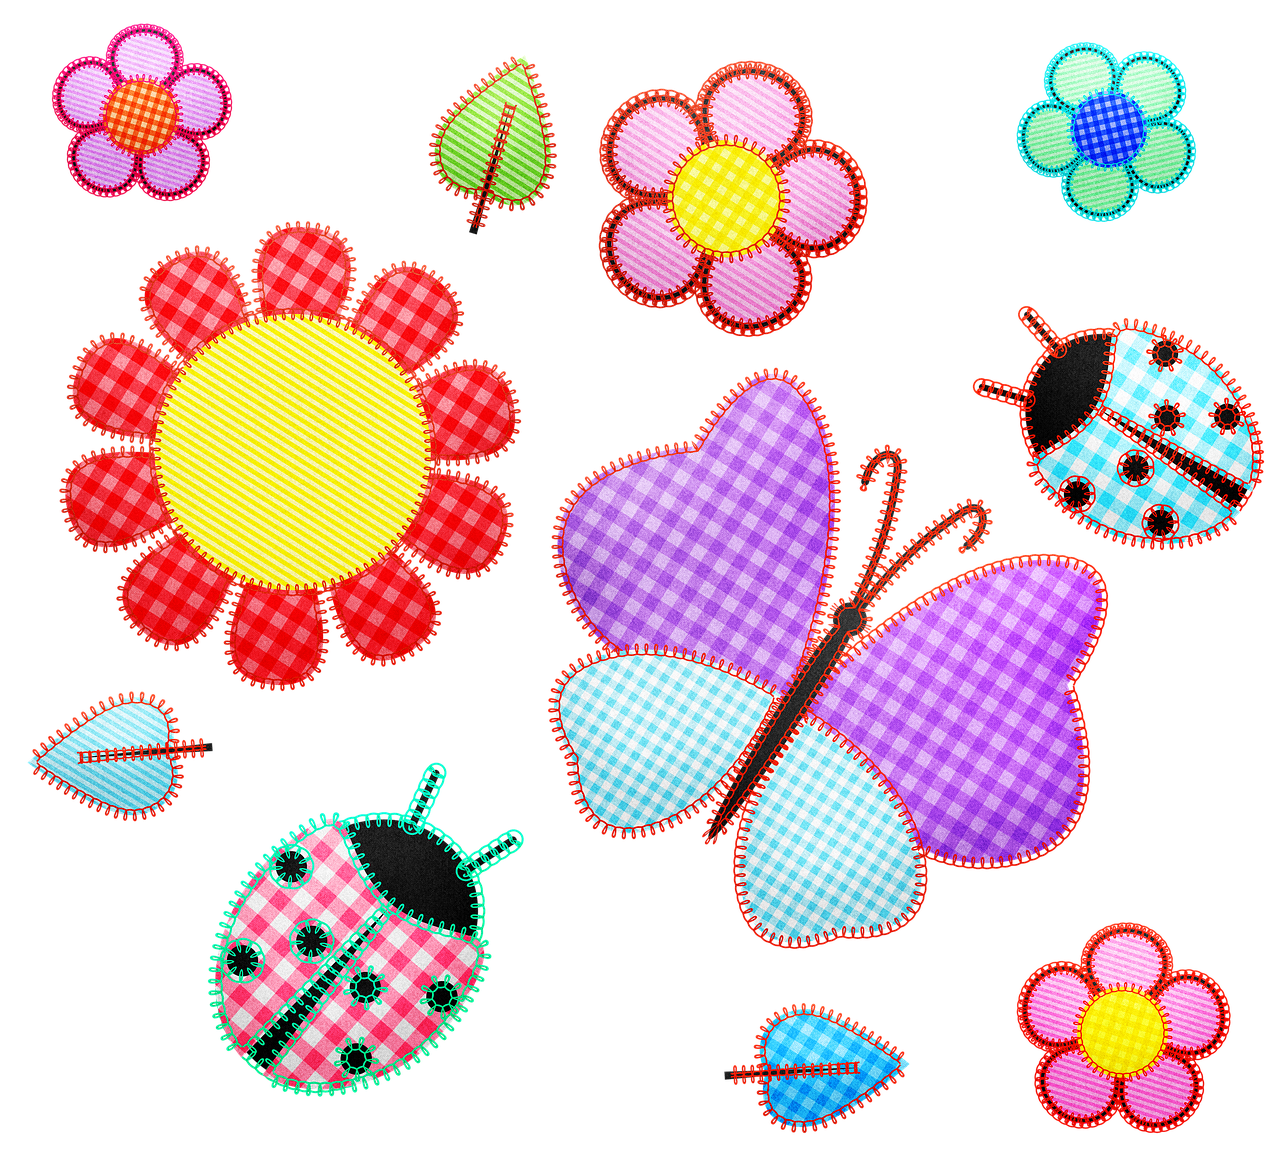 a collection of ladybugs and flowers on a black background, digital art, toyism, stitching, checkered motiffs, seasons!! : 🌸 ☀ 🍂 ❄, clip-art